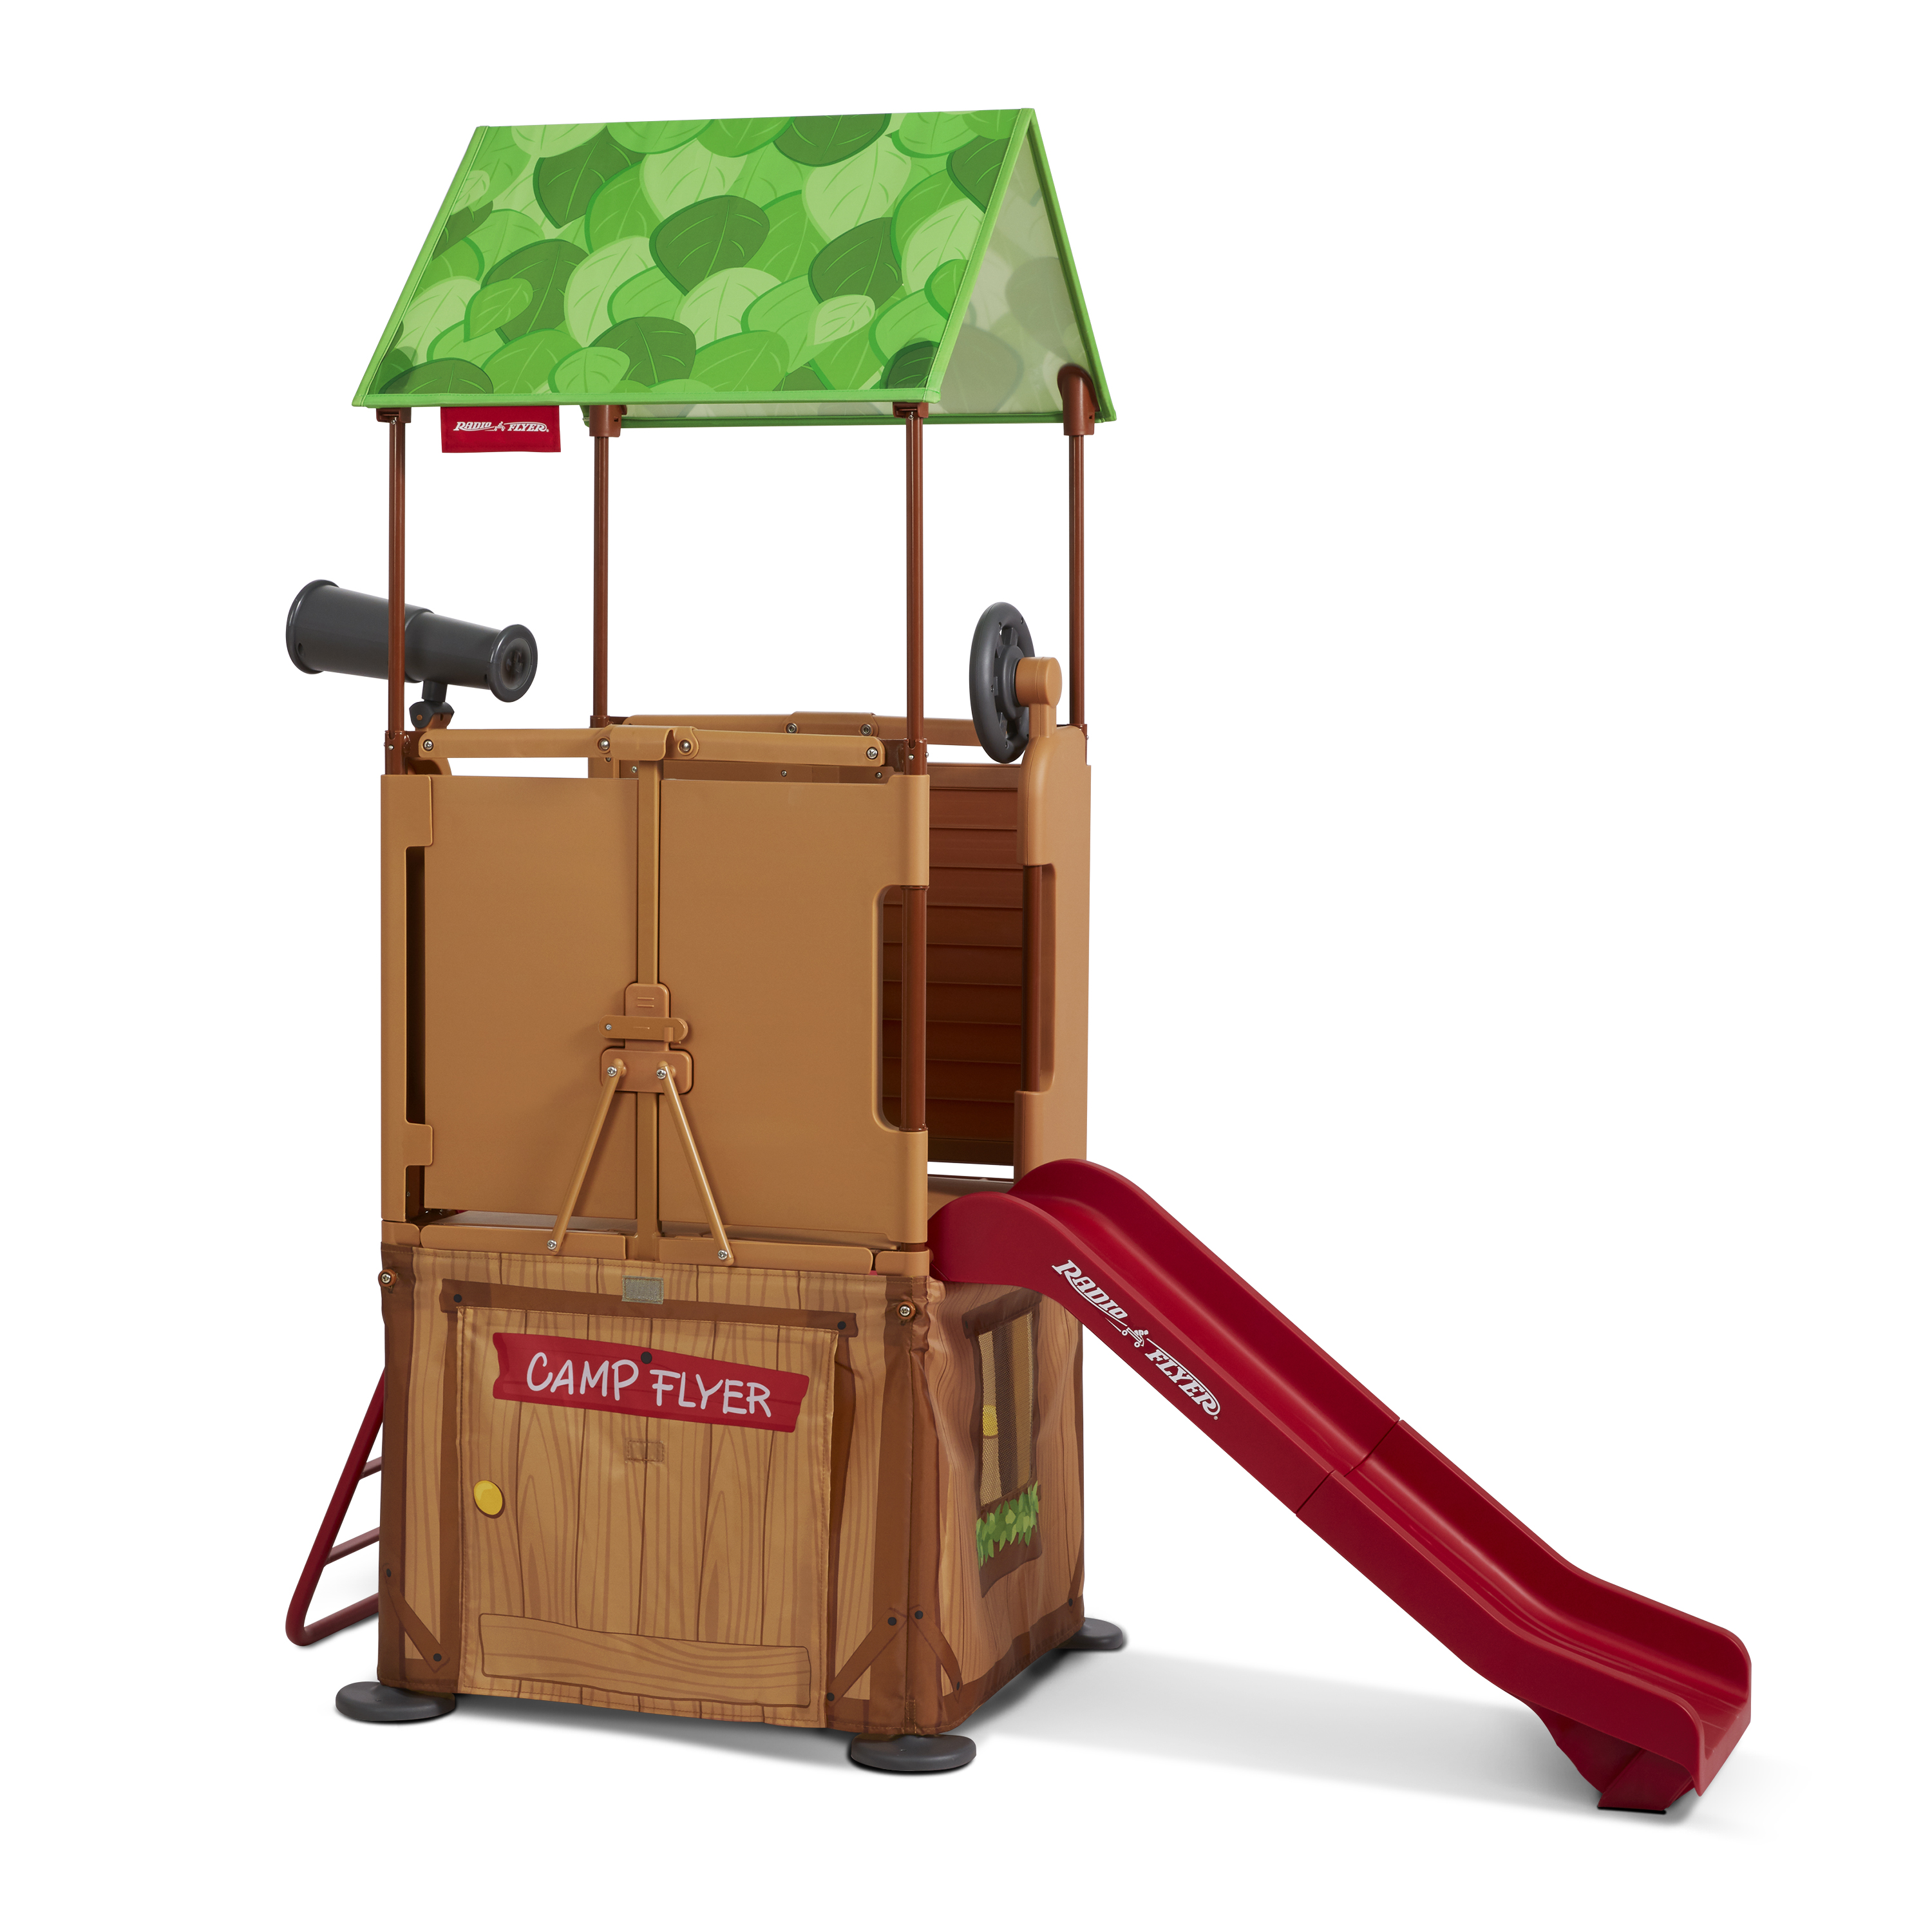 Radio Flyer, Folding Treetop Climber Playset with Slide, for Kids and Toddlers, Ages 2-5 years, Indoor and Outdoor Play - image 1 of 18